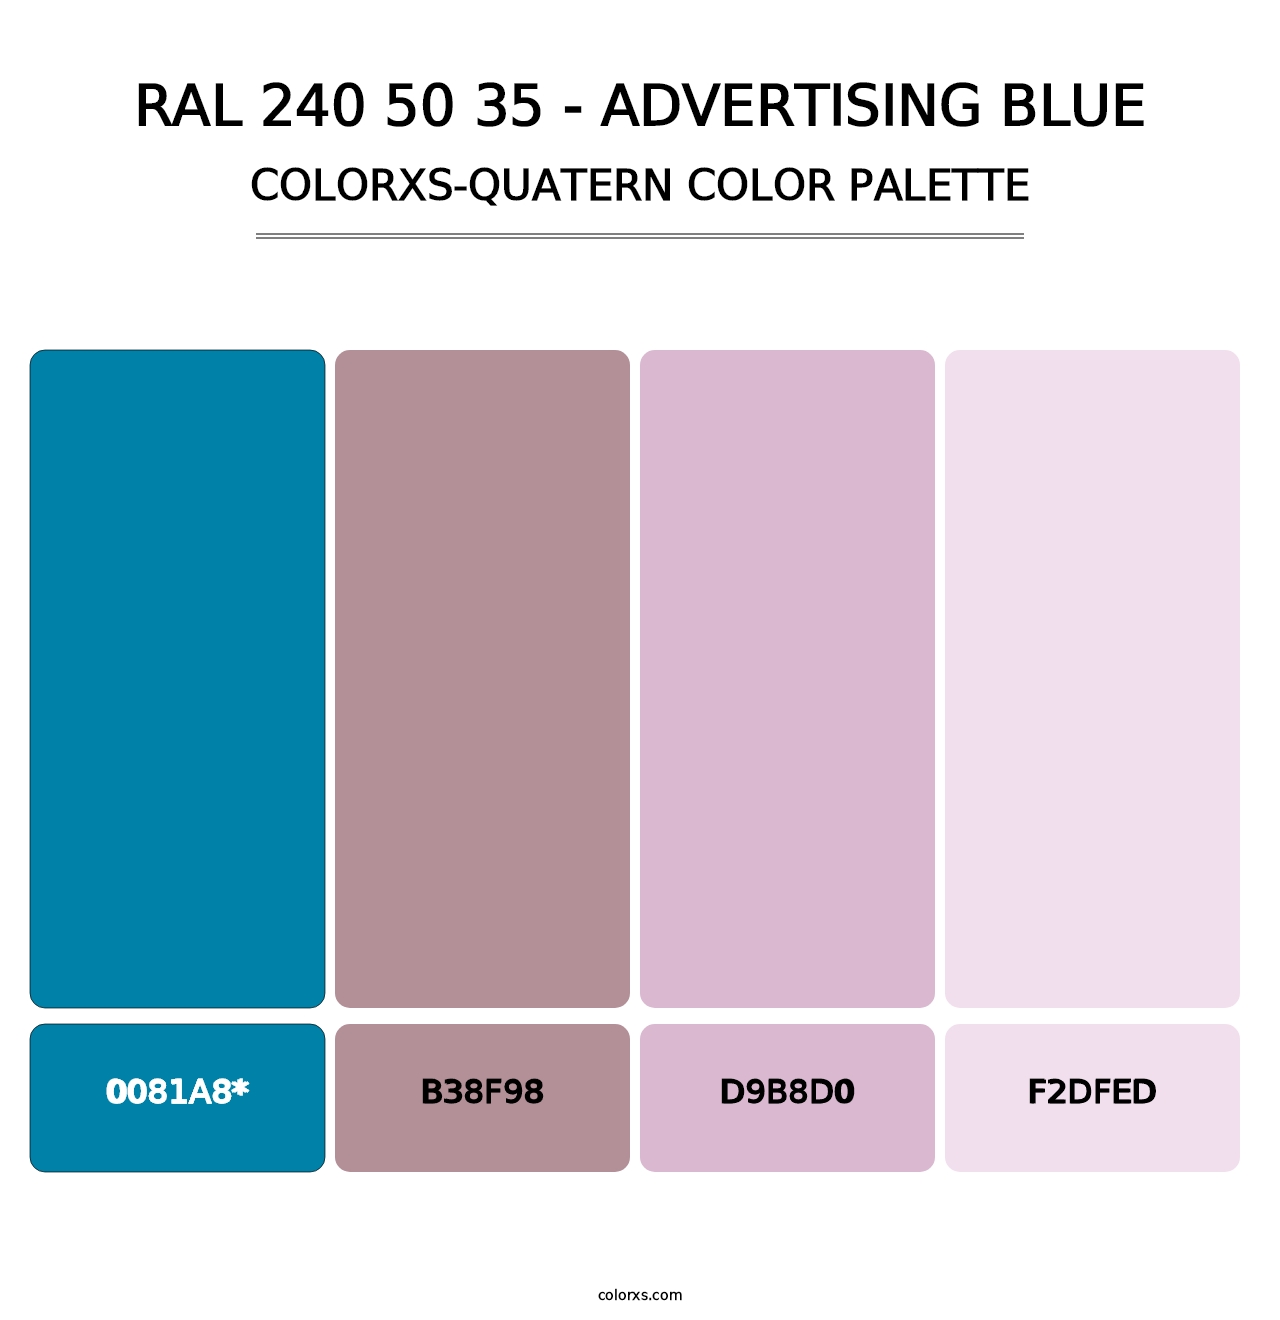 RAL 240 50 35 - Advertising Blue - Colorxs Quatern Palette